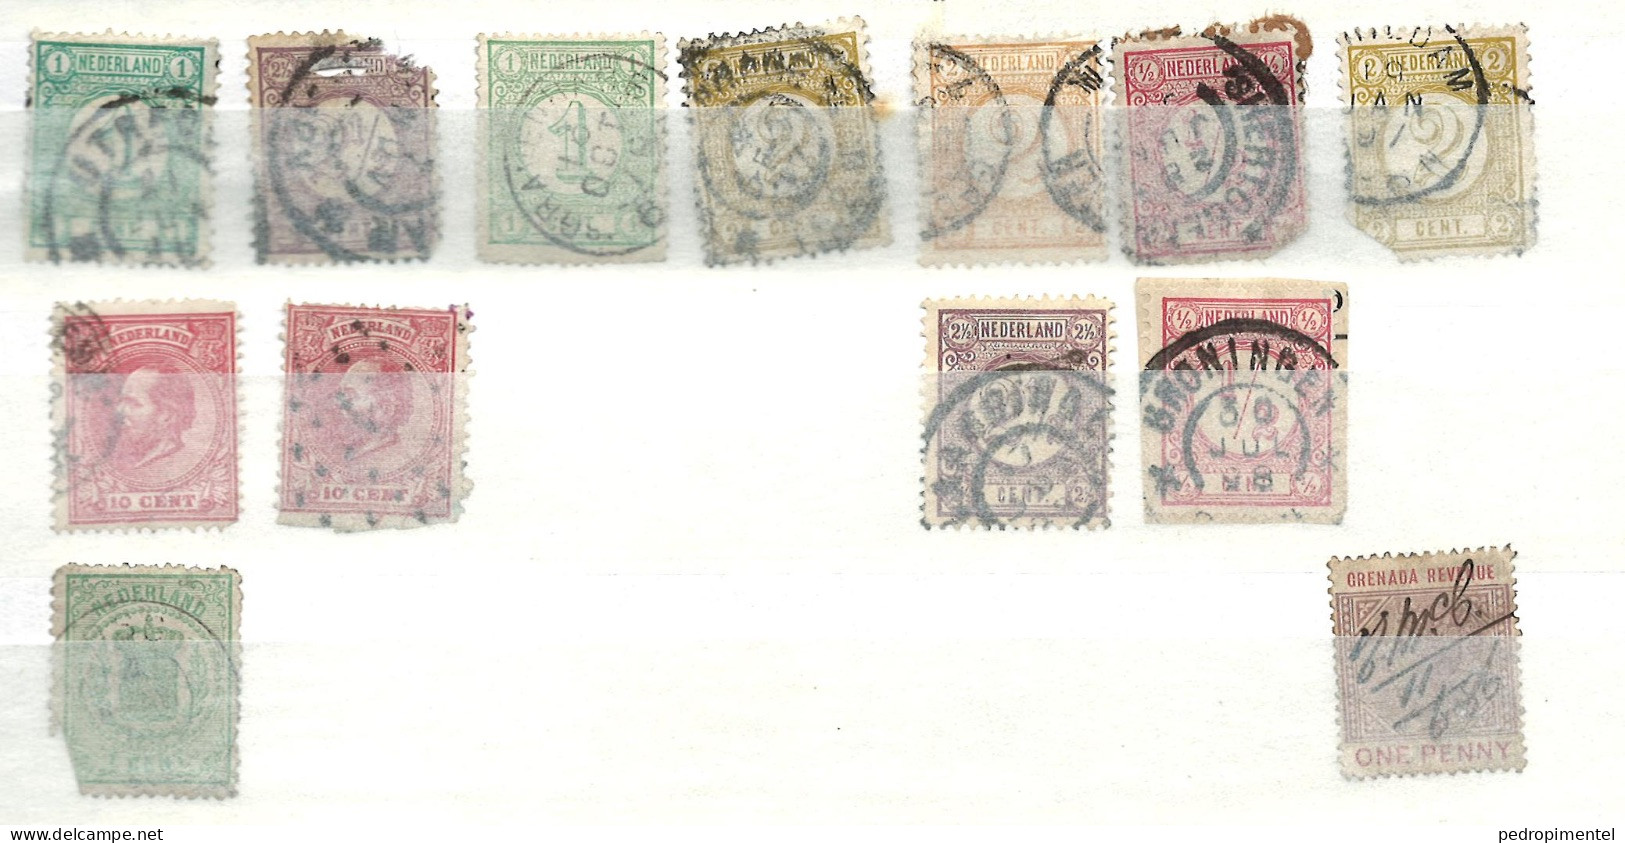 Netherlands | Small Collection | Pre WW | Used (Mixed Quality) - Verzamelingen